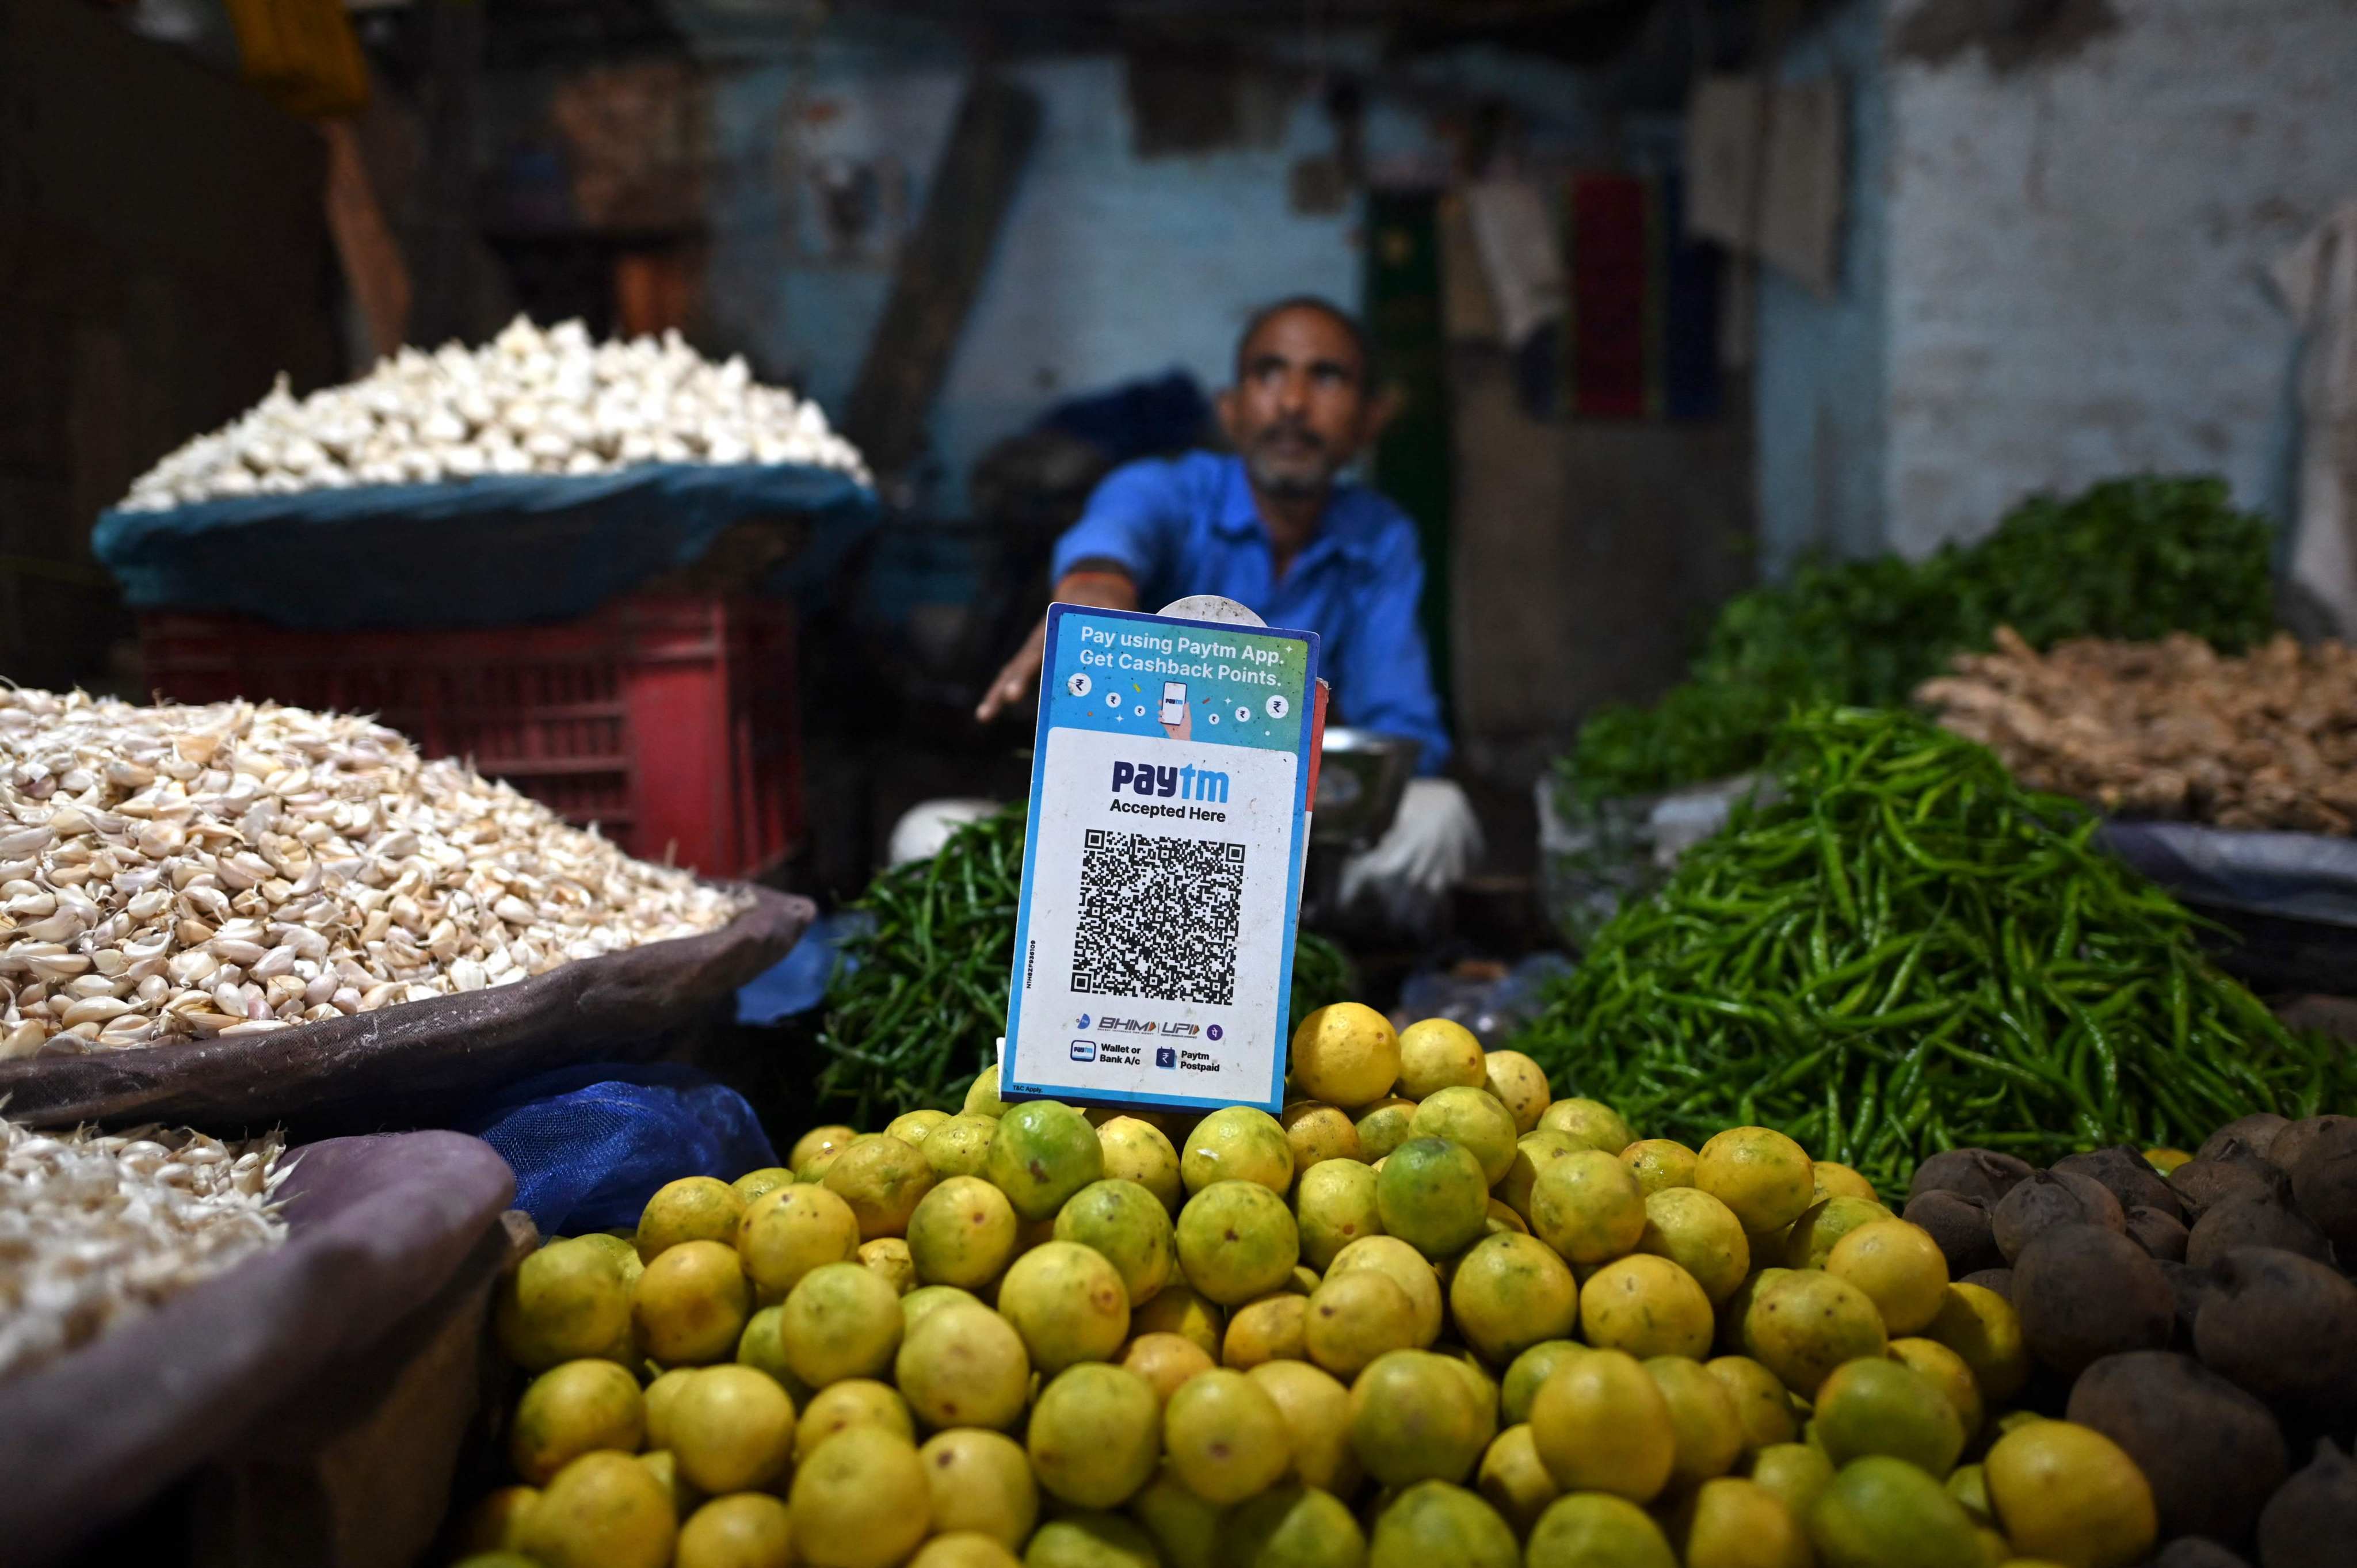 A vegetable vendor’s stall has a barcode for Paytm, an Indian cellphone-based digital payment platform, at a market in New Delhi in November 2021. While digital payment use is growing across Asia, access to other financial products is severely lagging. Photo: AFP